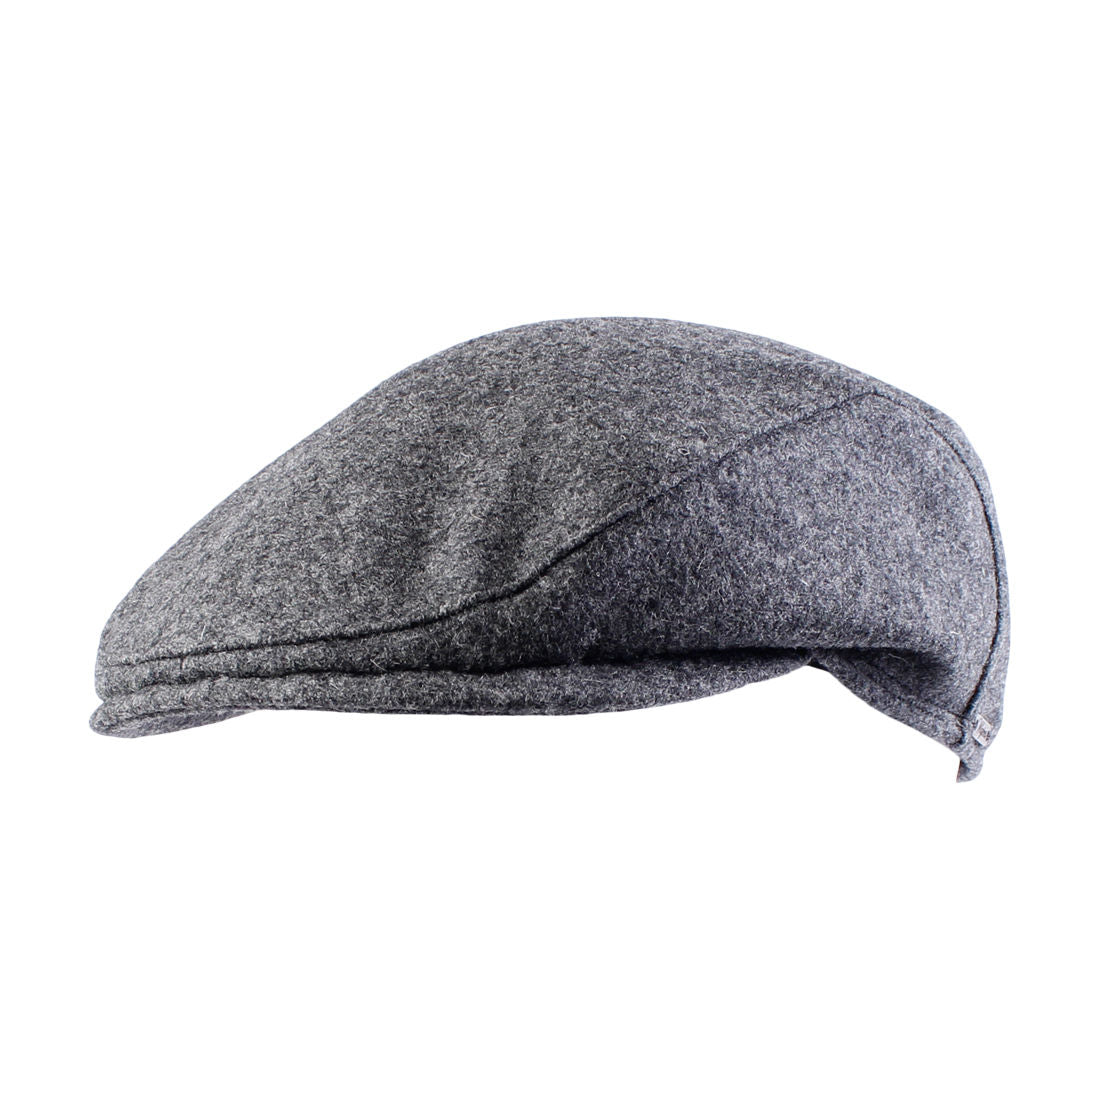 Melton Wool Ivy Slim Cap with Earflaps (Choice of Colors) by Wigens